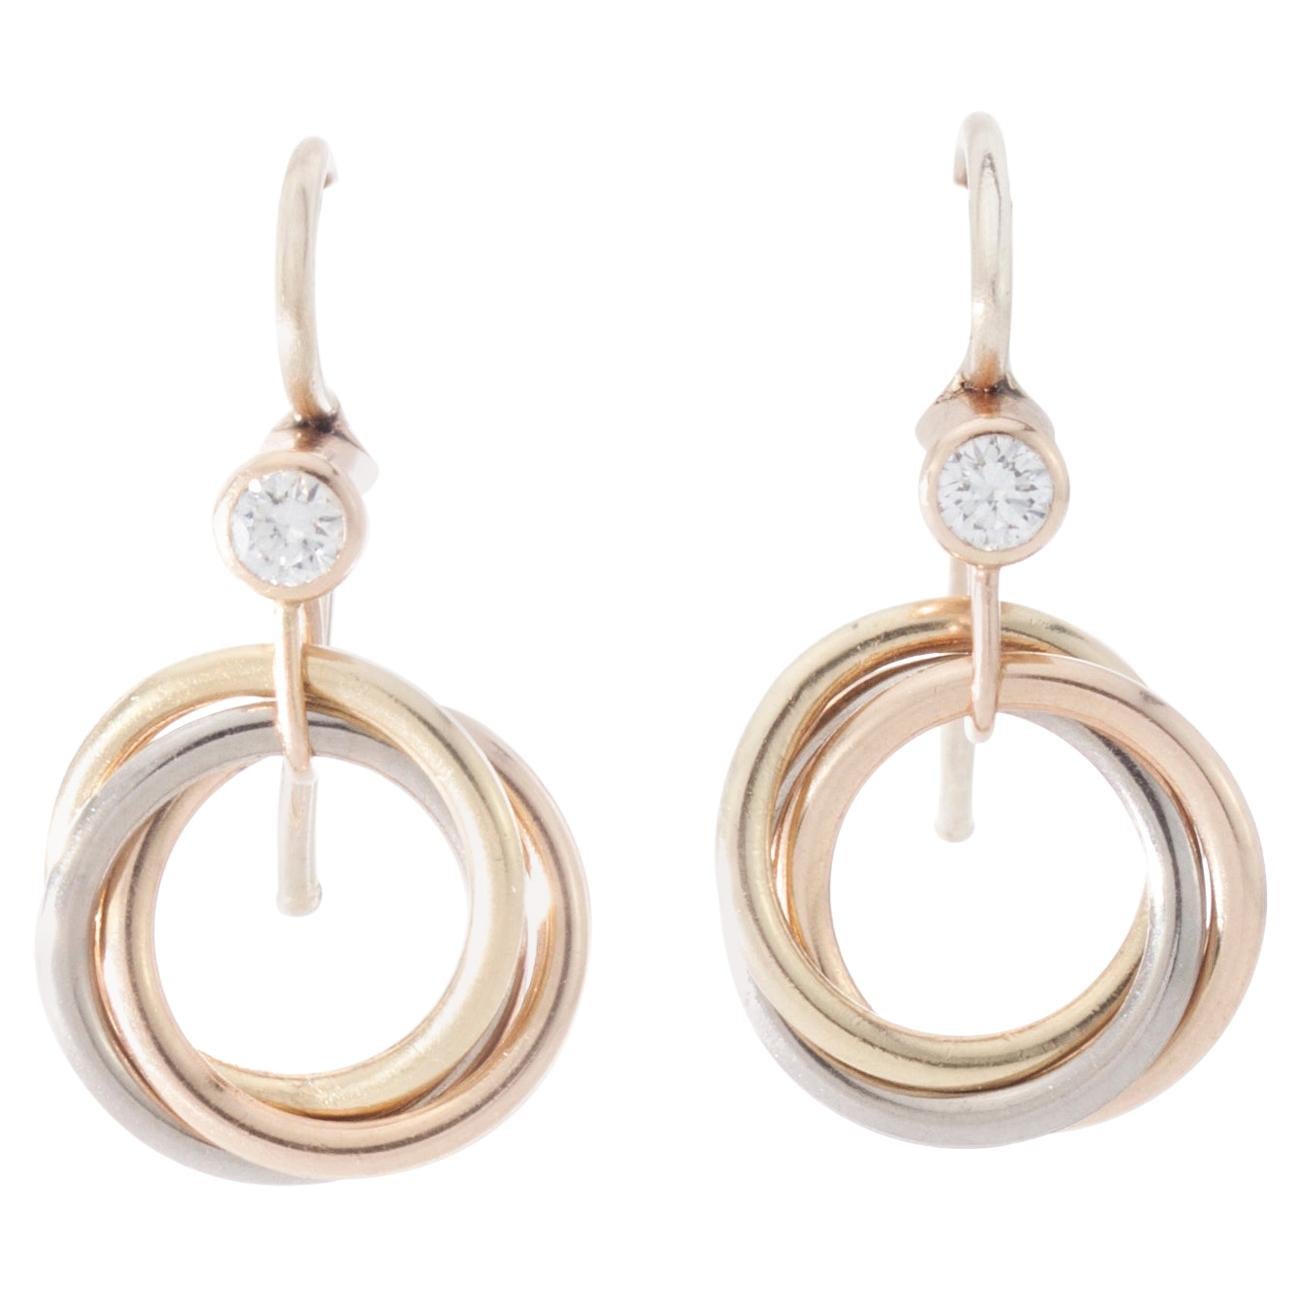 Cartier Trinity 18 Karat White Yellow and Rose Gold Ladies Earrings with Diamond